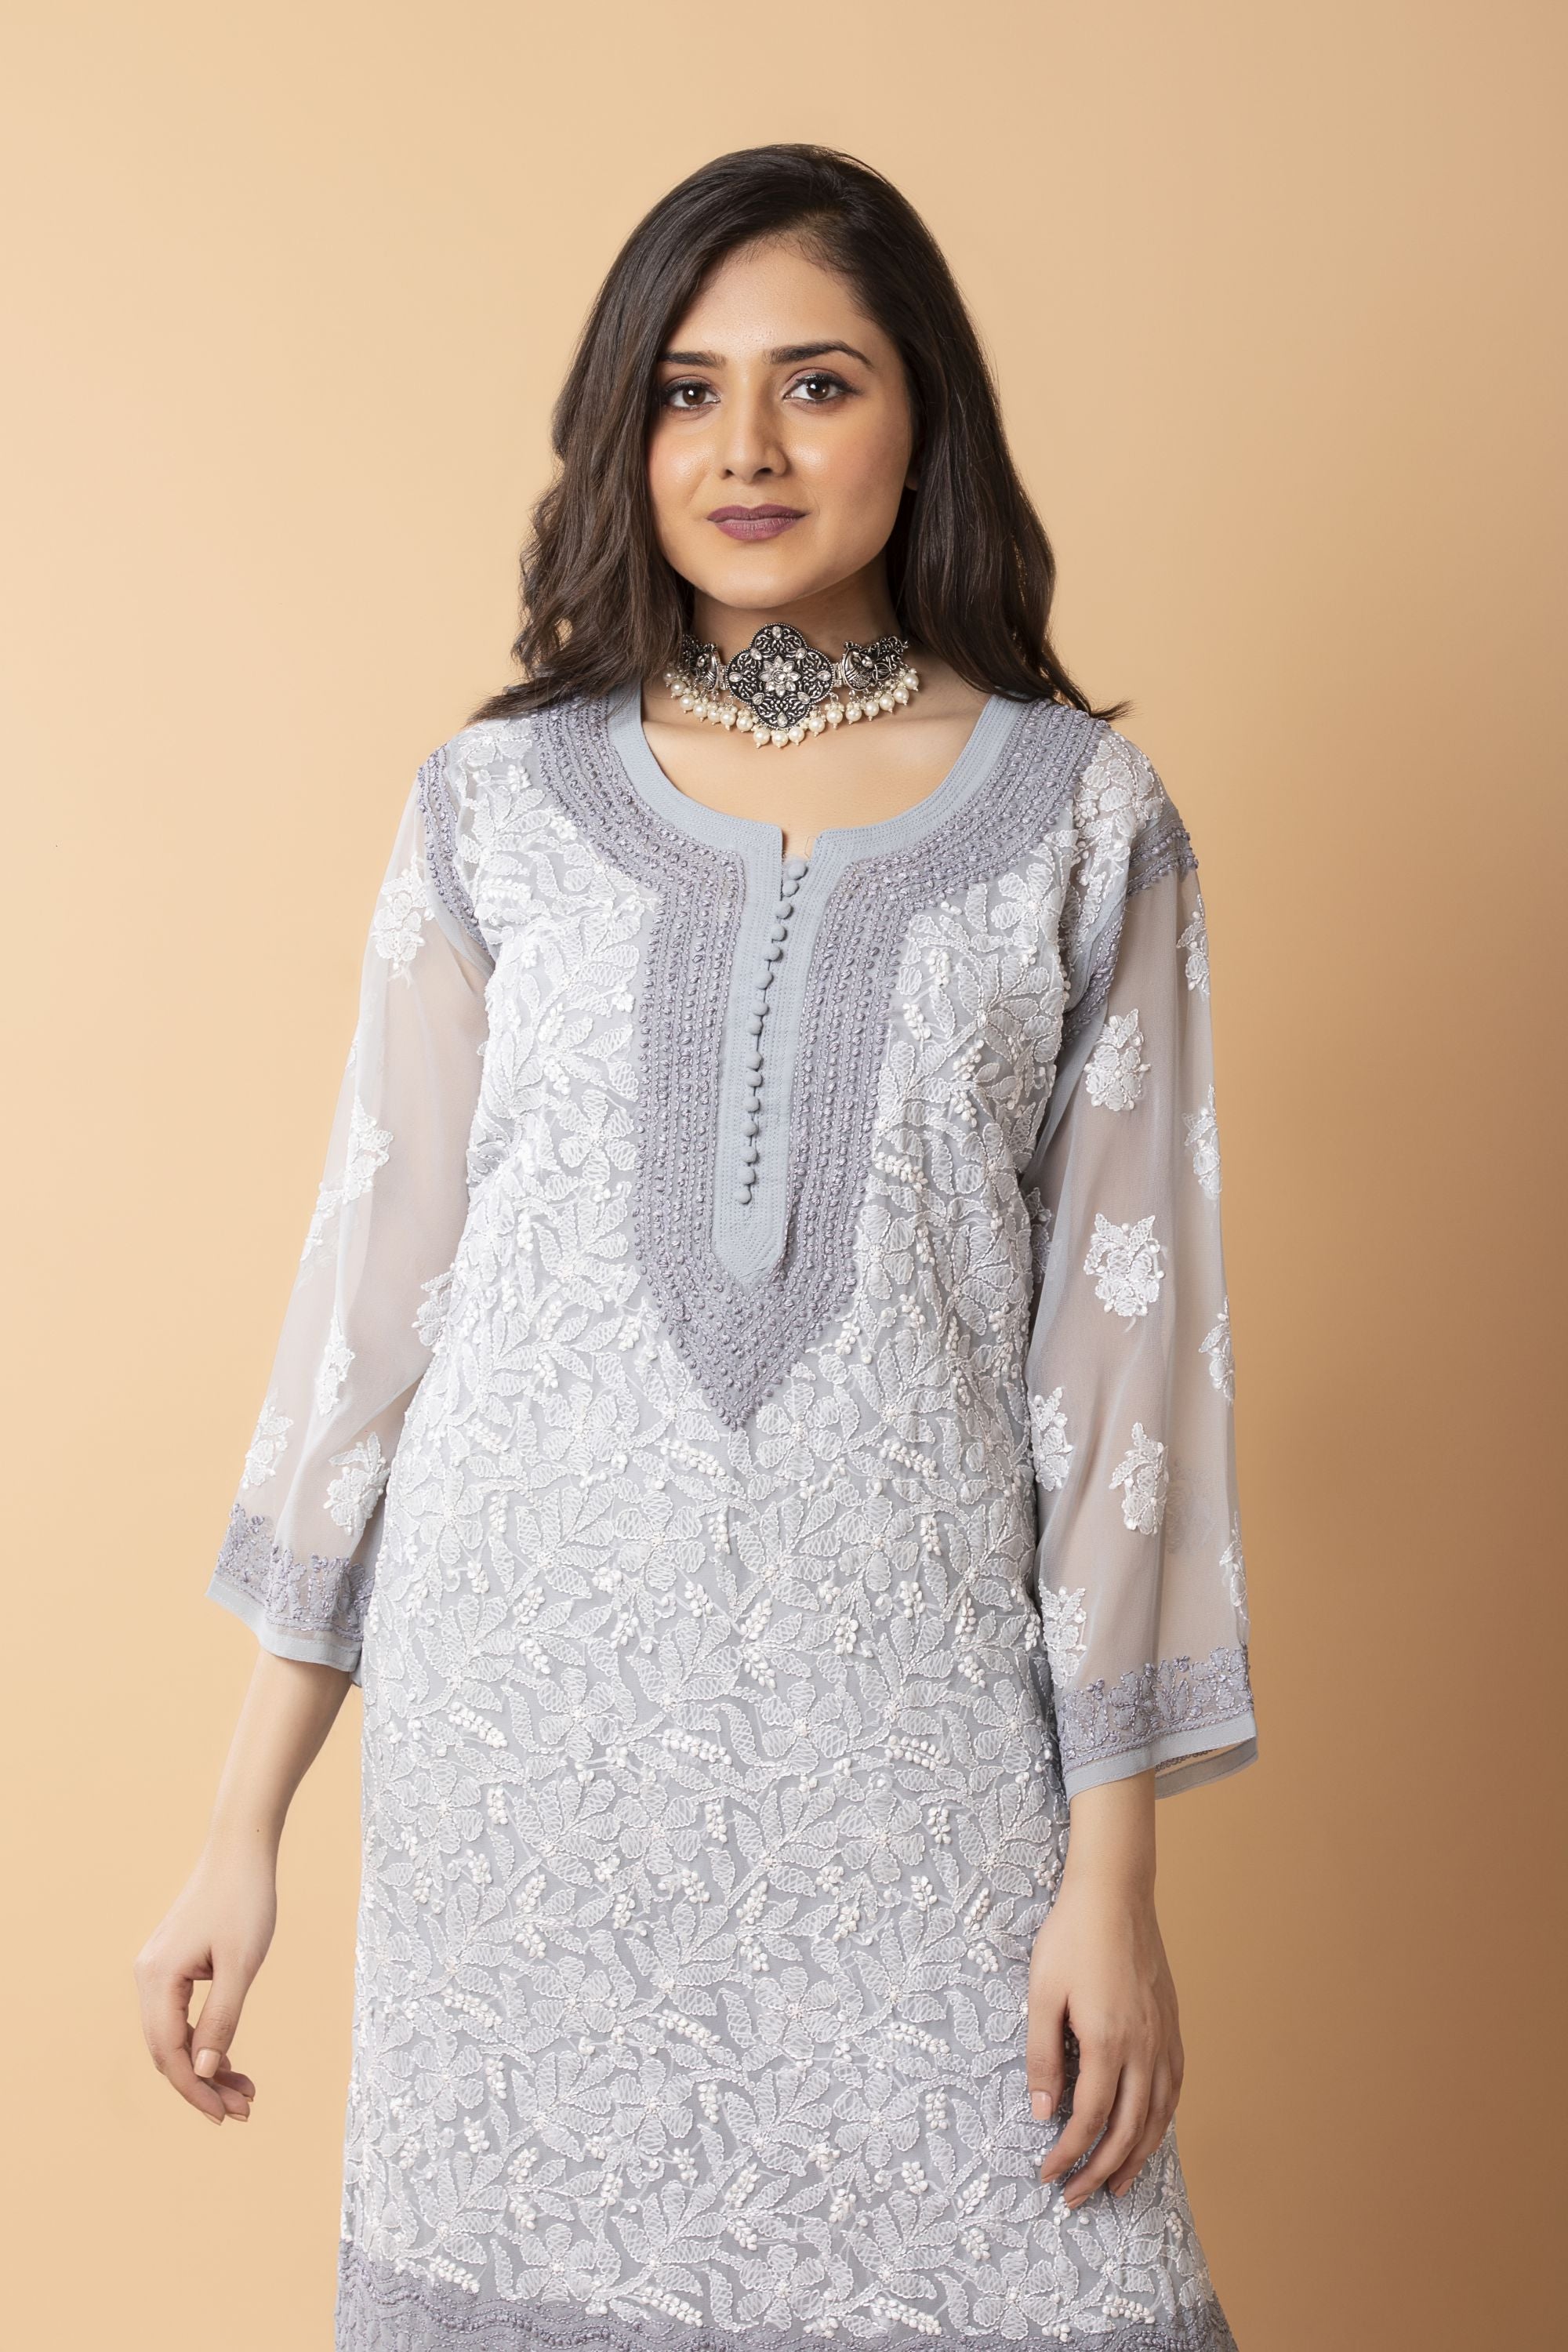 Premium chikankari mul Cotton Ombre Dyed Plus Size Kurta (#3019) - Vogue N  Trends - Buy the lucknowi chikankari online at lowest prices!!!